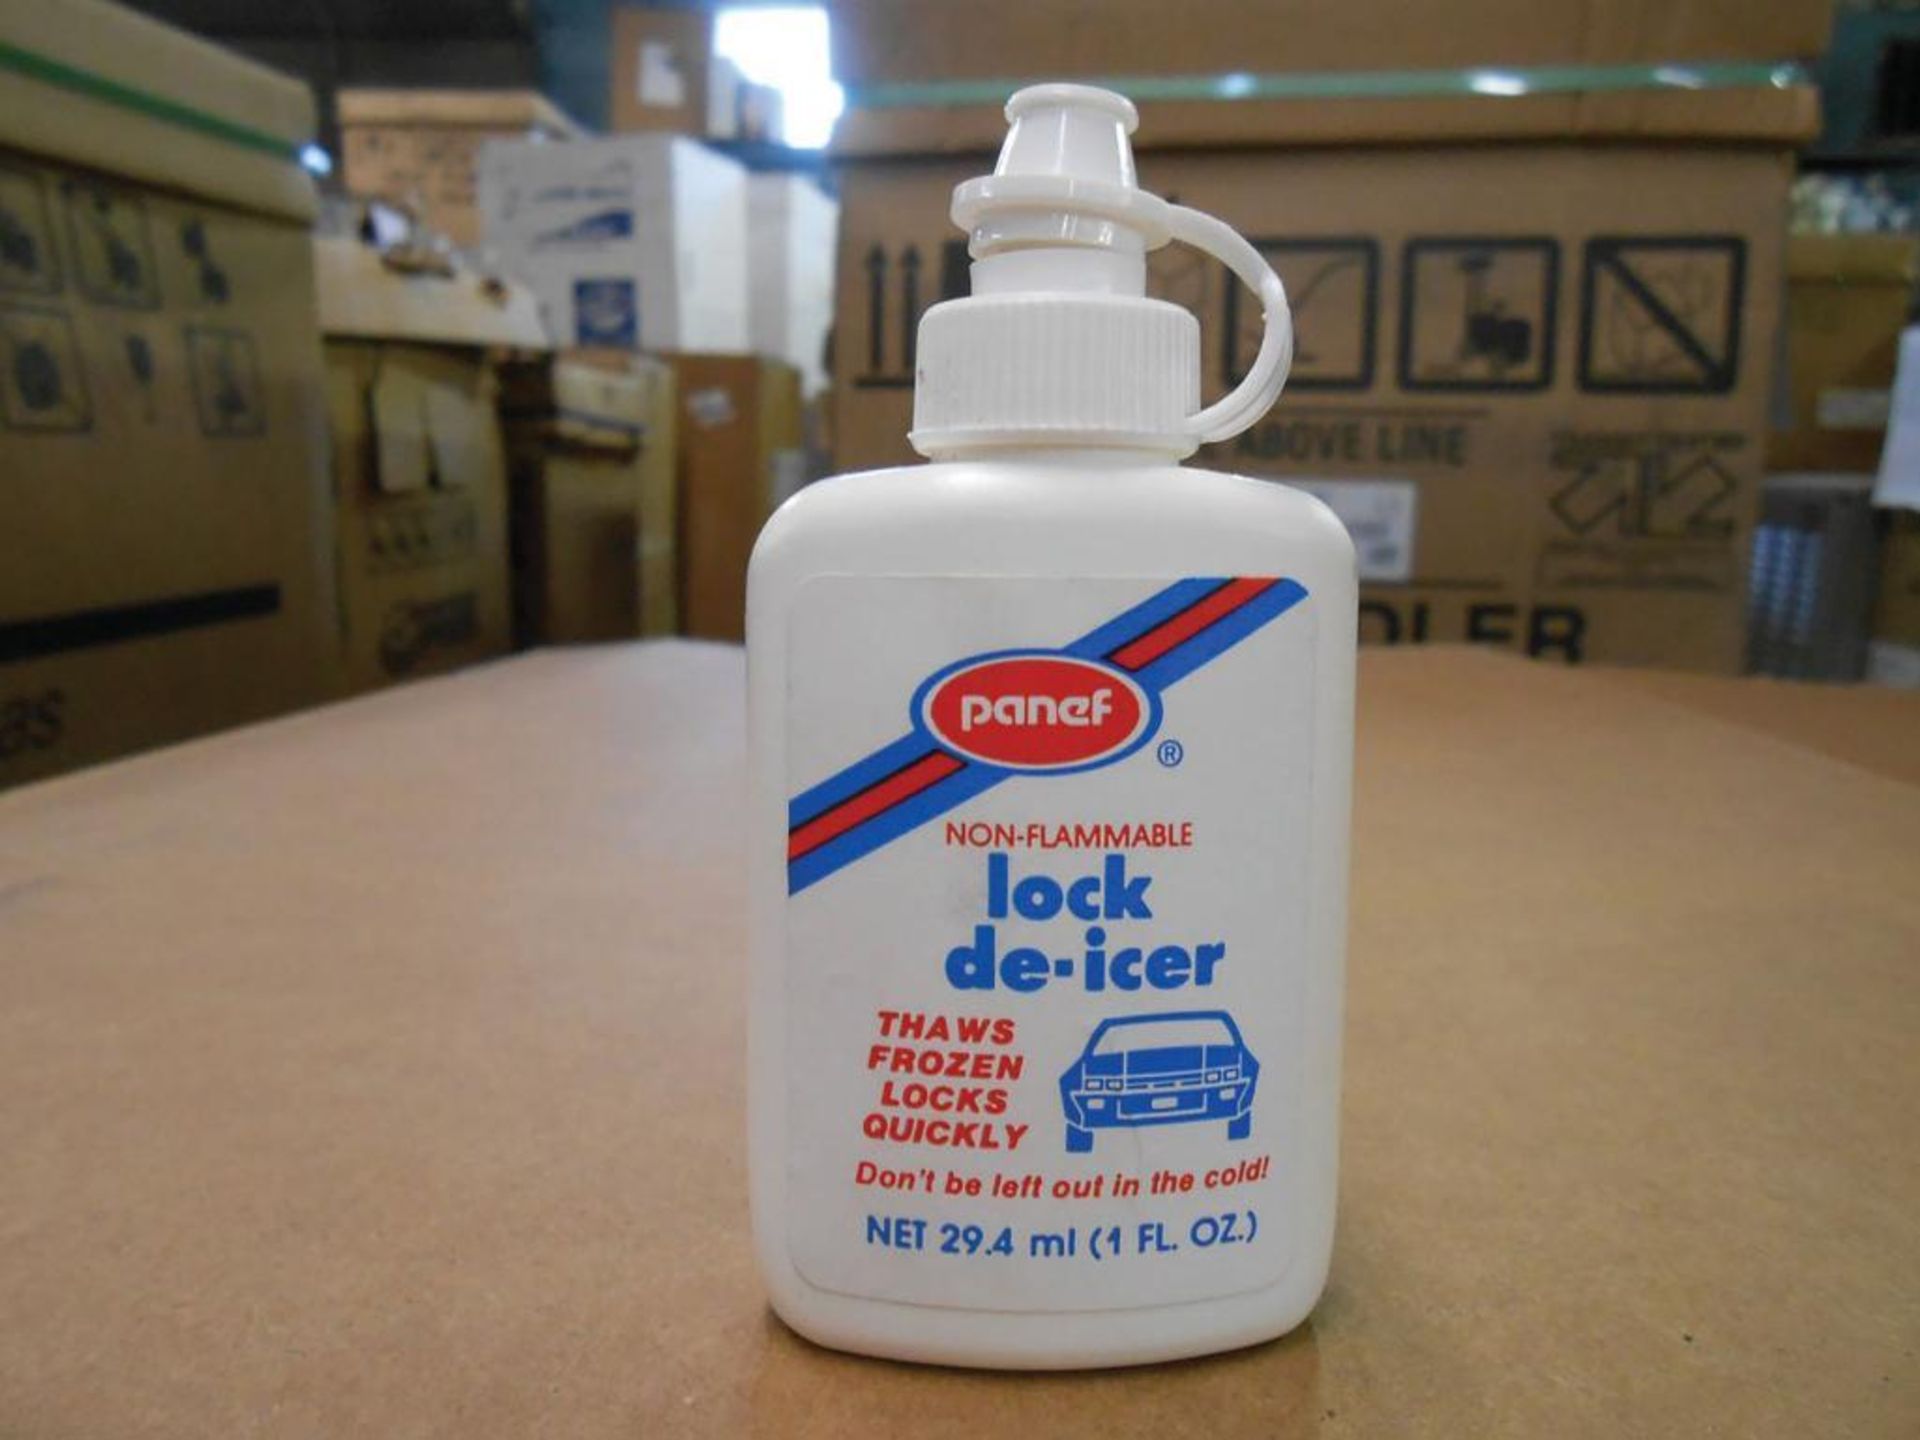 (864) Units of Panef 1oz Lock De-Icer Thaws Frozen Lock Quickly, Model LD-24, Weight: 1.6 Oz, Dims: - Image 2 of 2